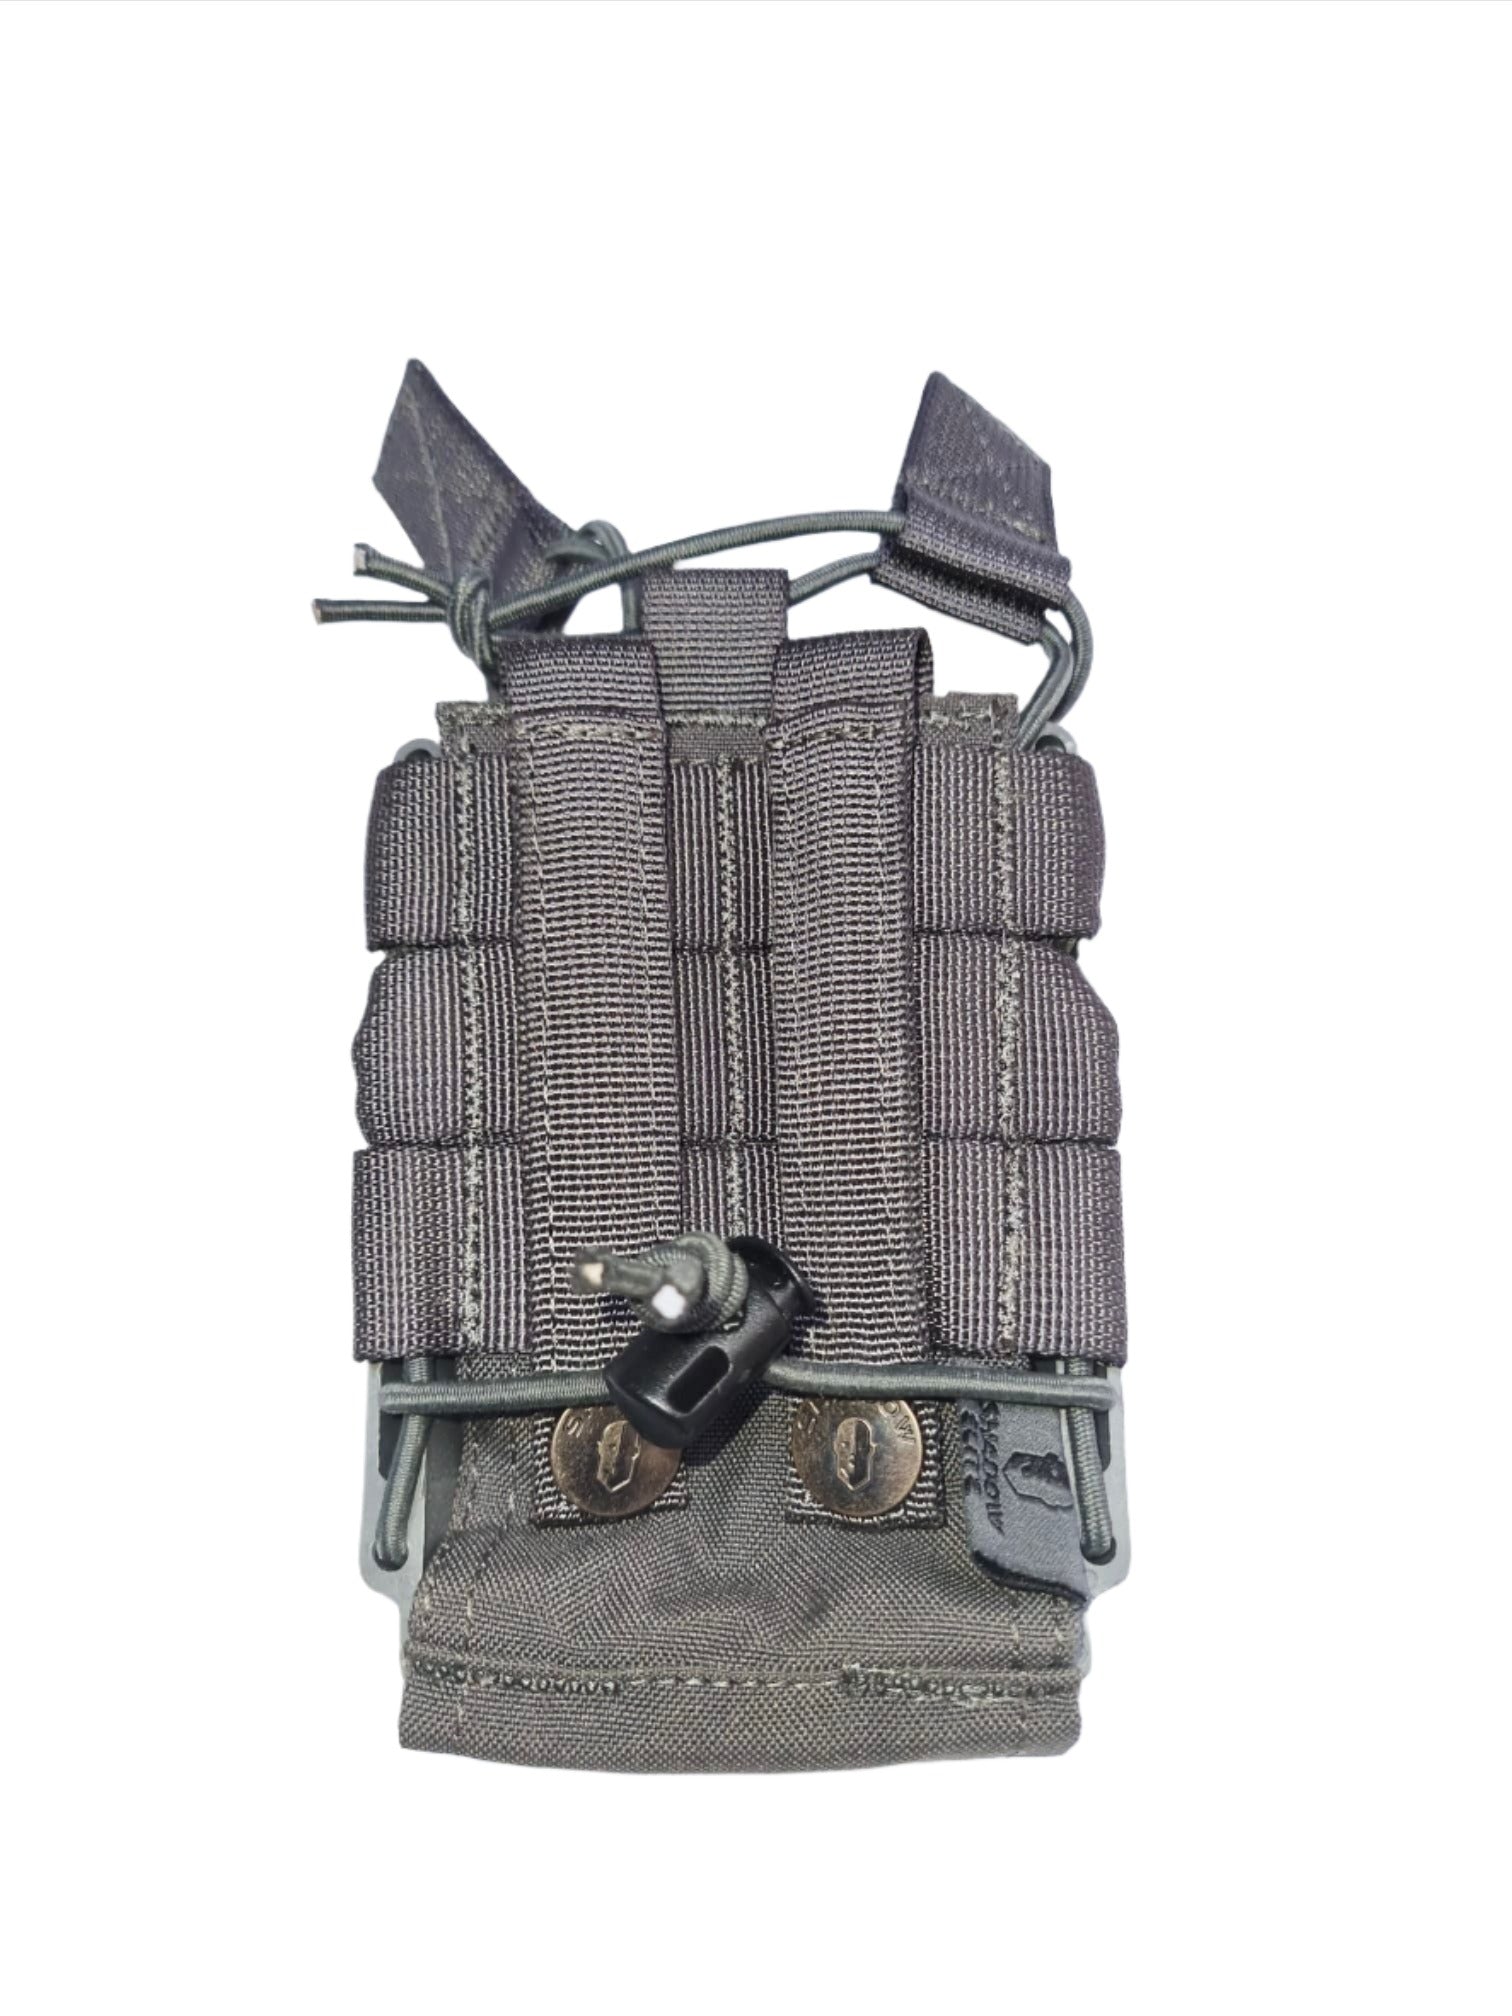 SHE-21020 Rapid Access Double Rifle Magazine Pouch GREY